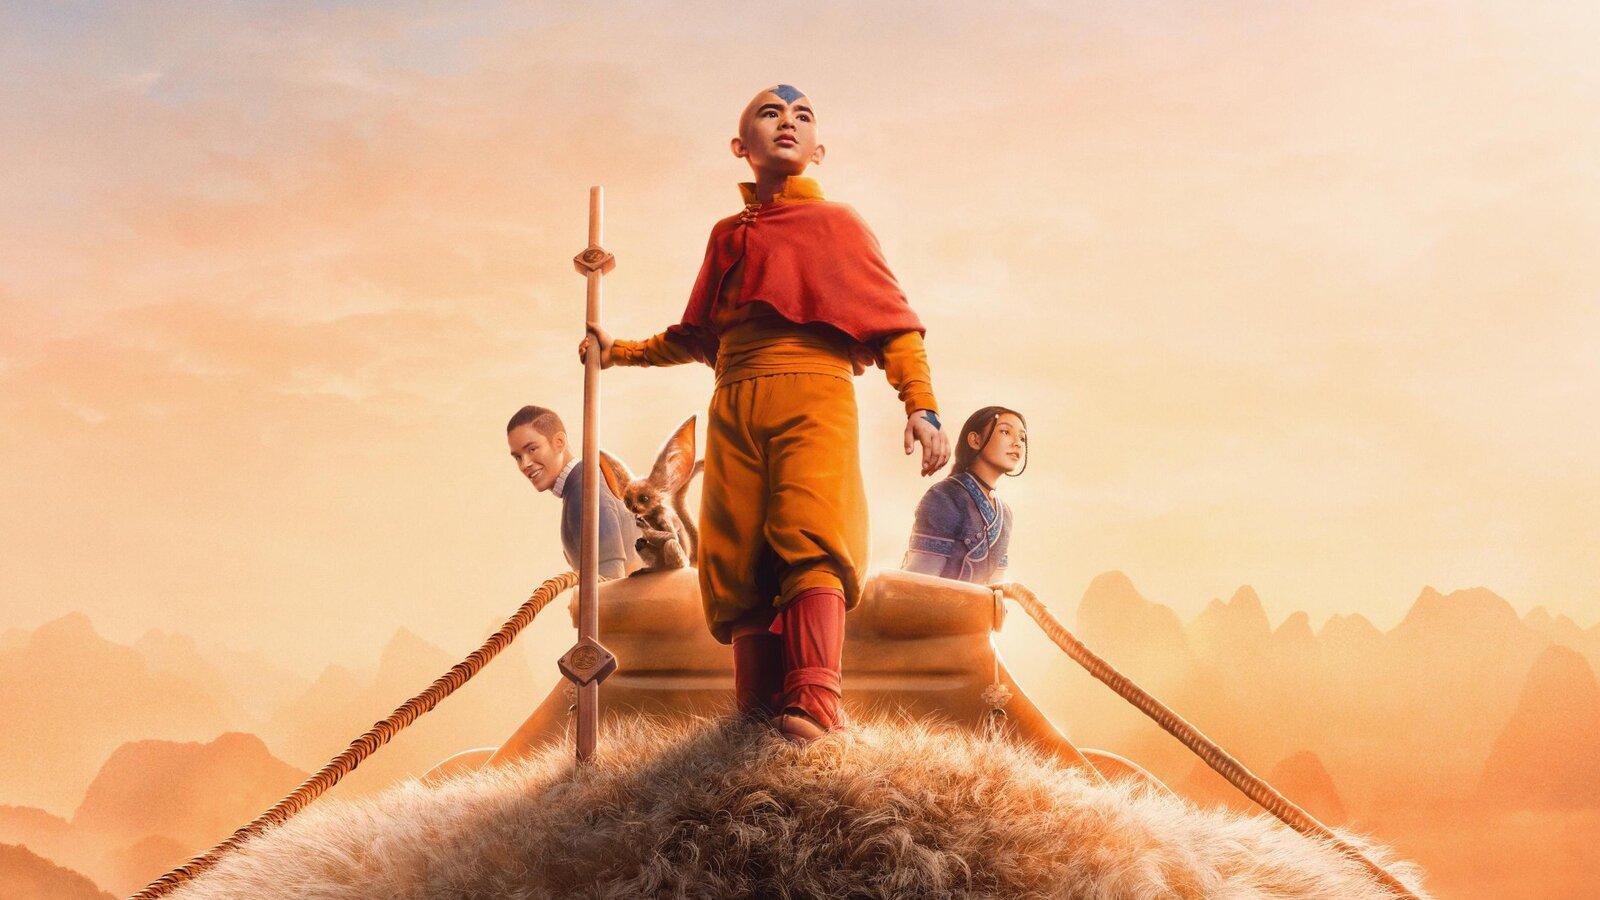 Live action avatar the last airbender poster that includes aang sokka and Katara